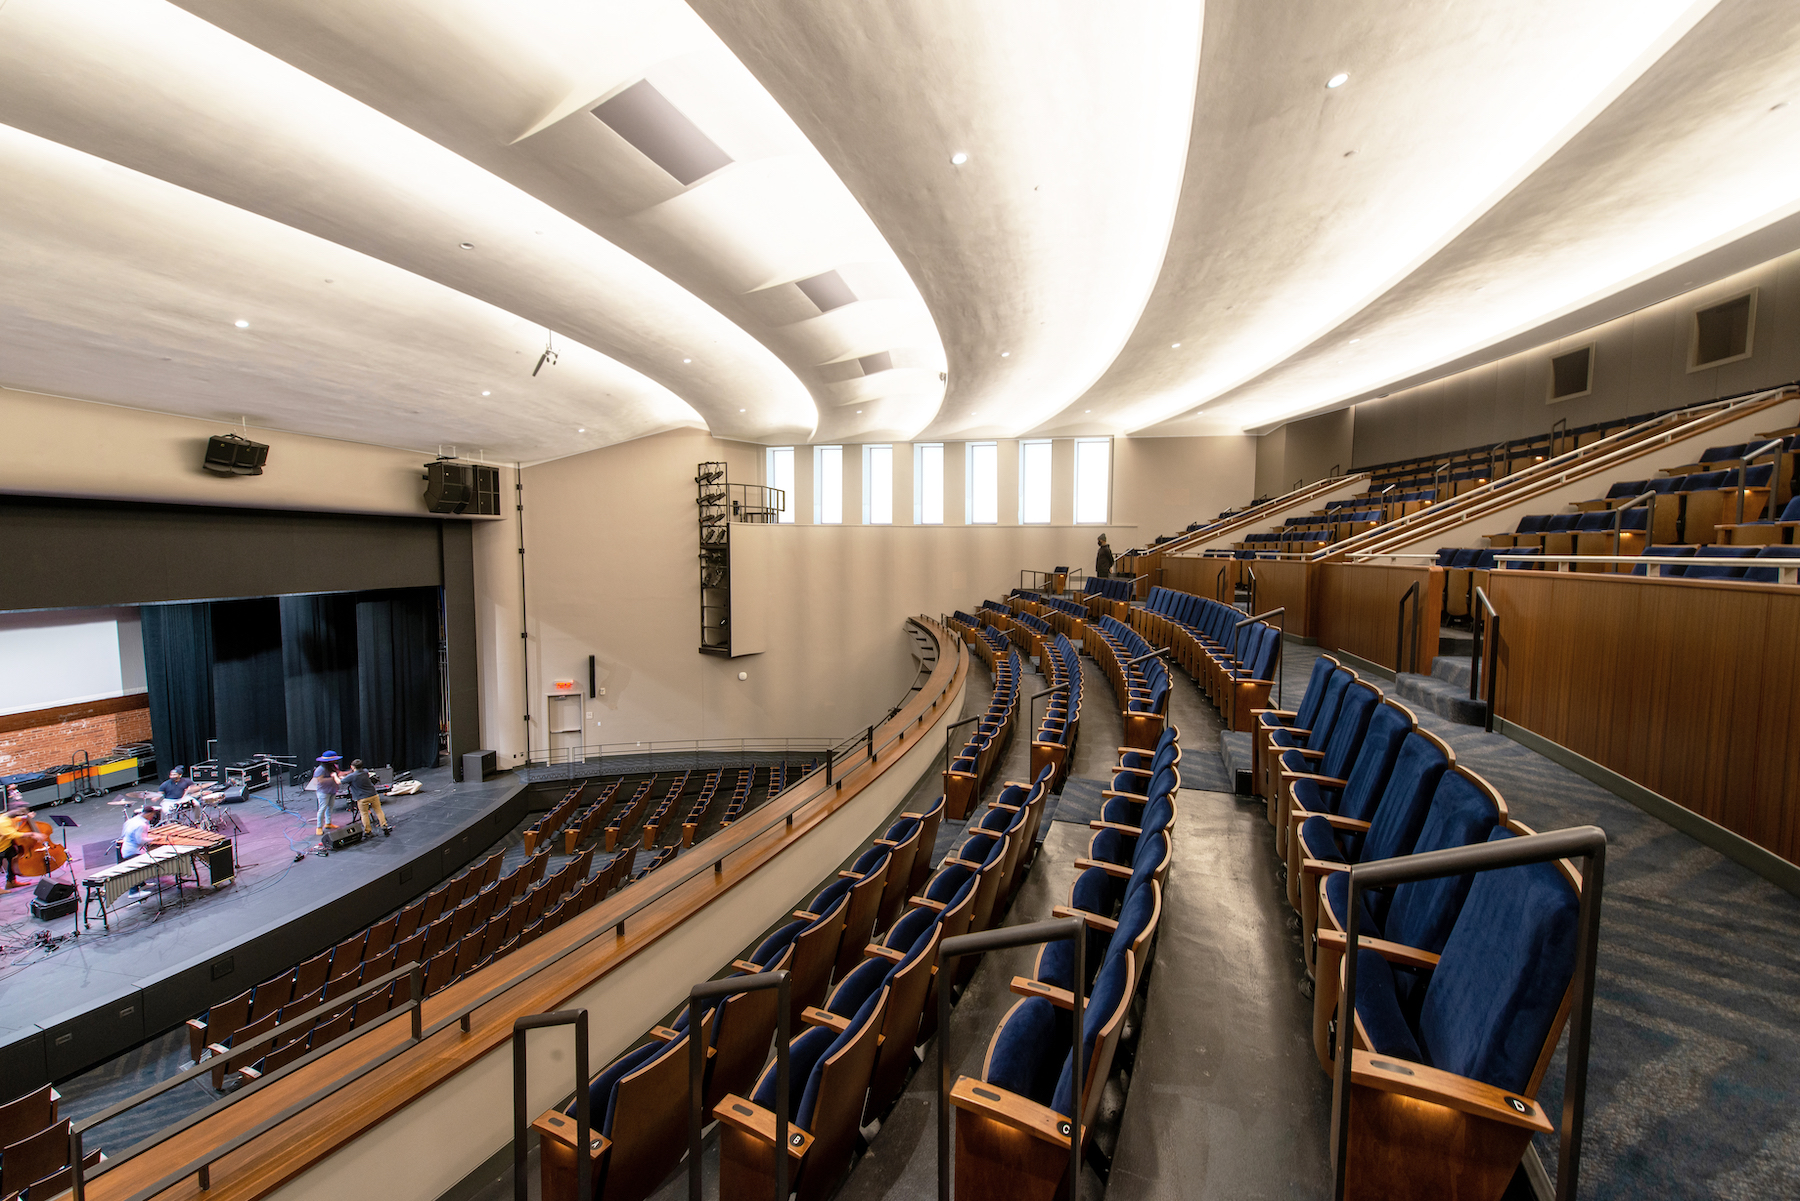 The renovation brings natural light into the auditorium